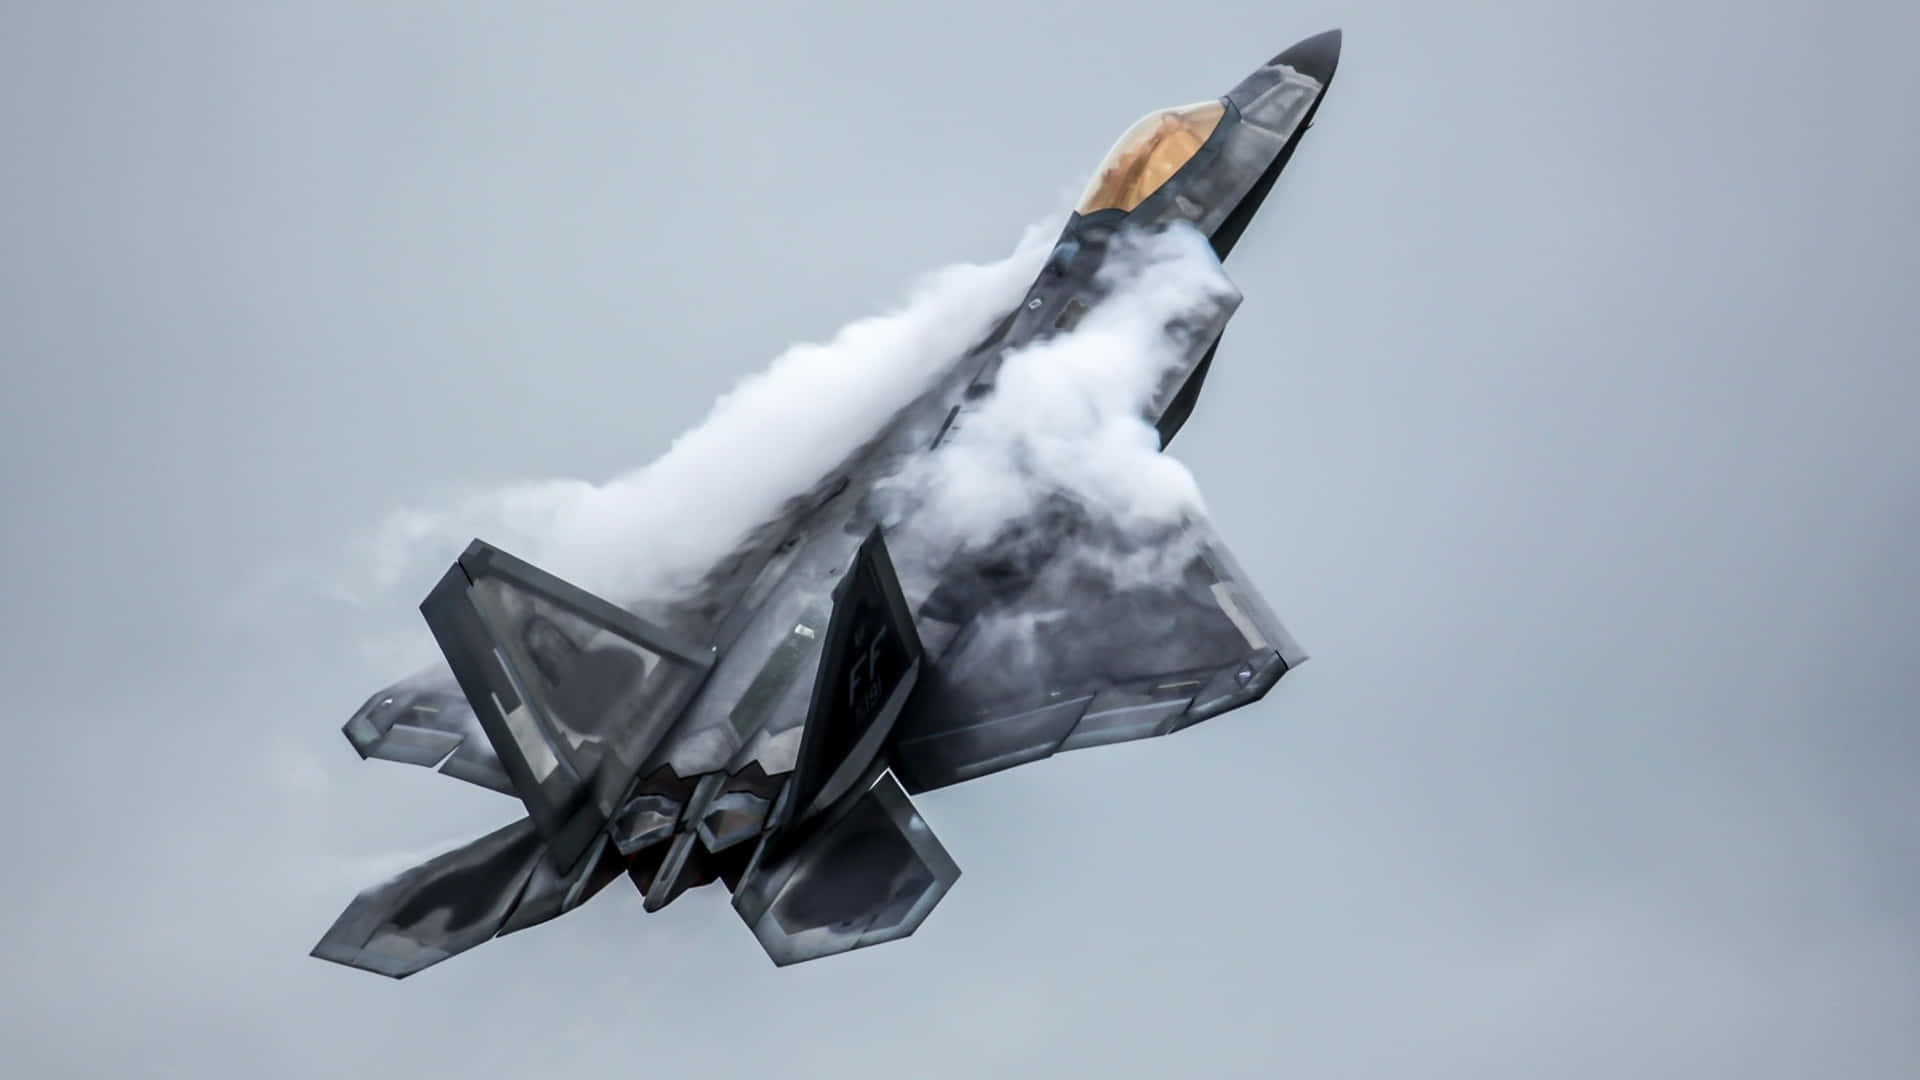 F-22 Raptor Stealth Fighter Jet Flying Over Snowy Mountains Wallpaper